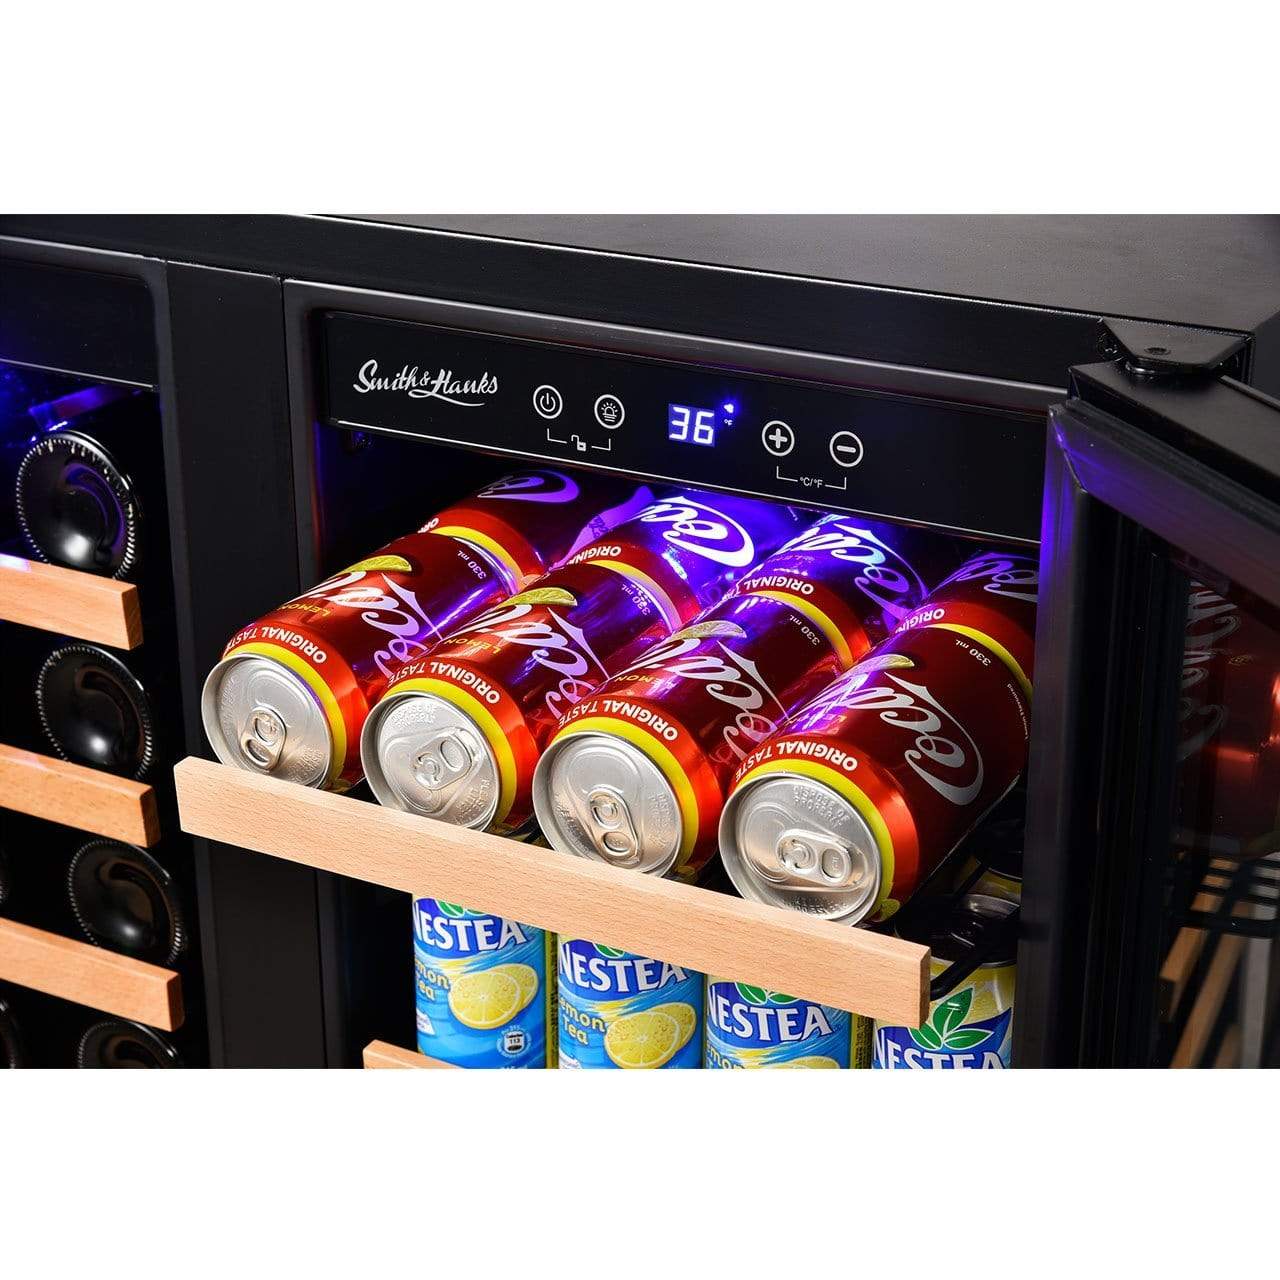 Smith & Hanks Stainless Steel Wine and Beverage Fridge BEV176SD Wine/Beverage Coolers Combo BEV176SD Luxury Appliances Direct